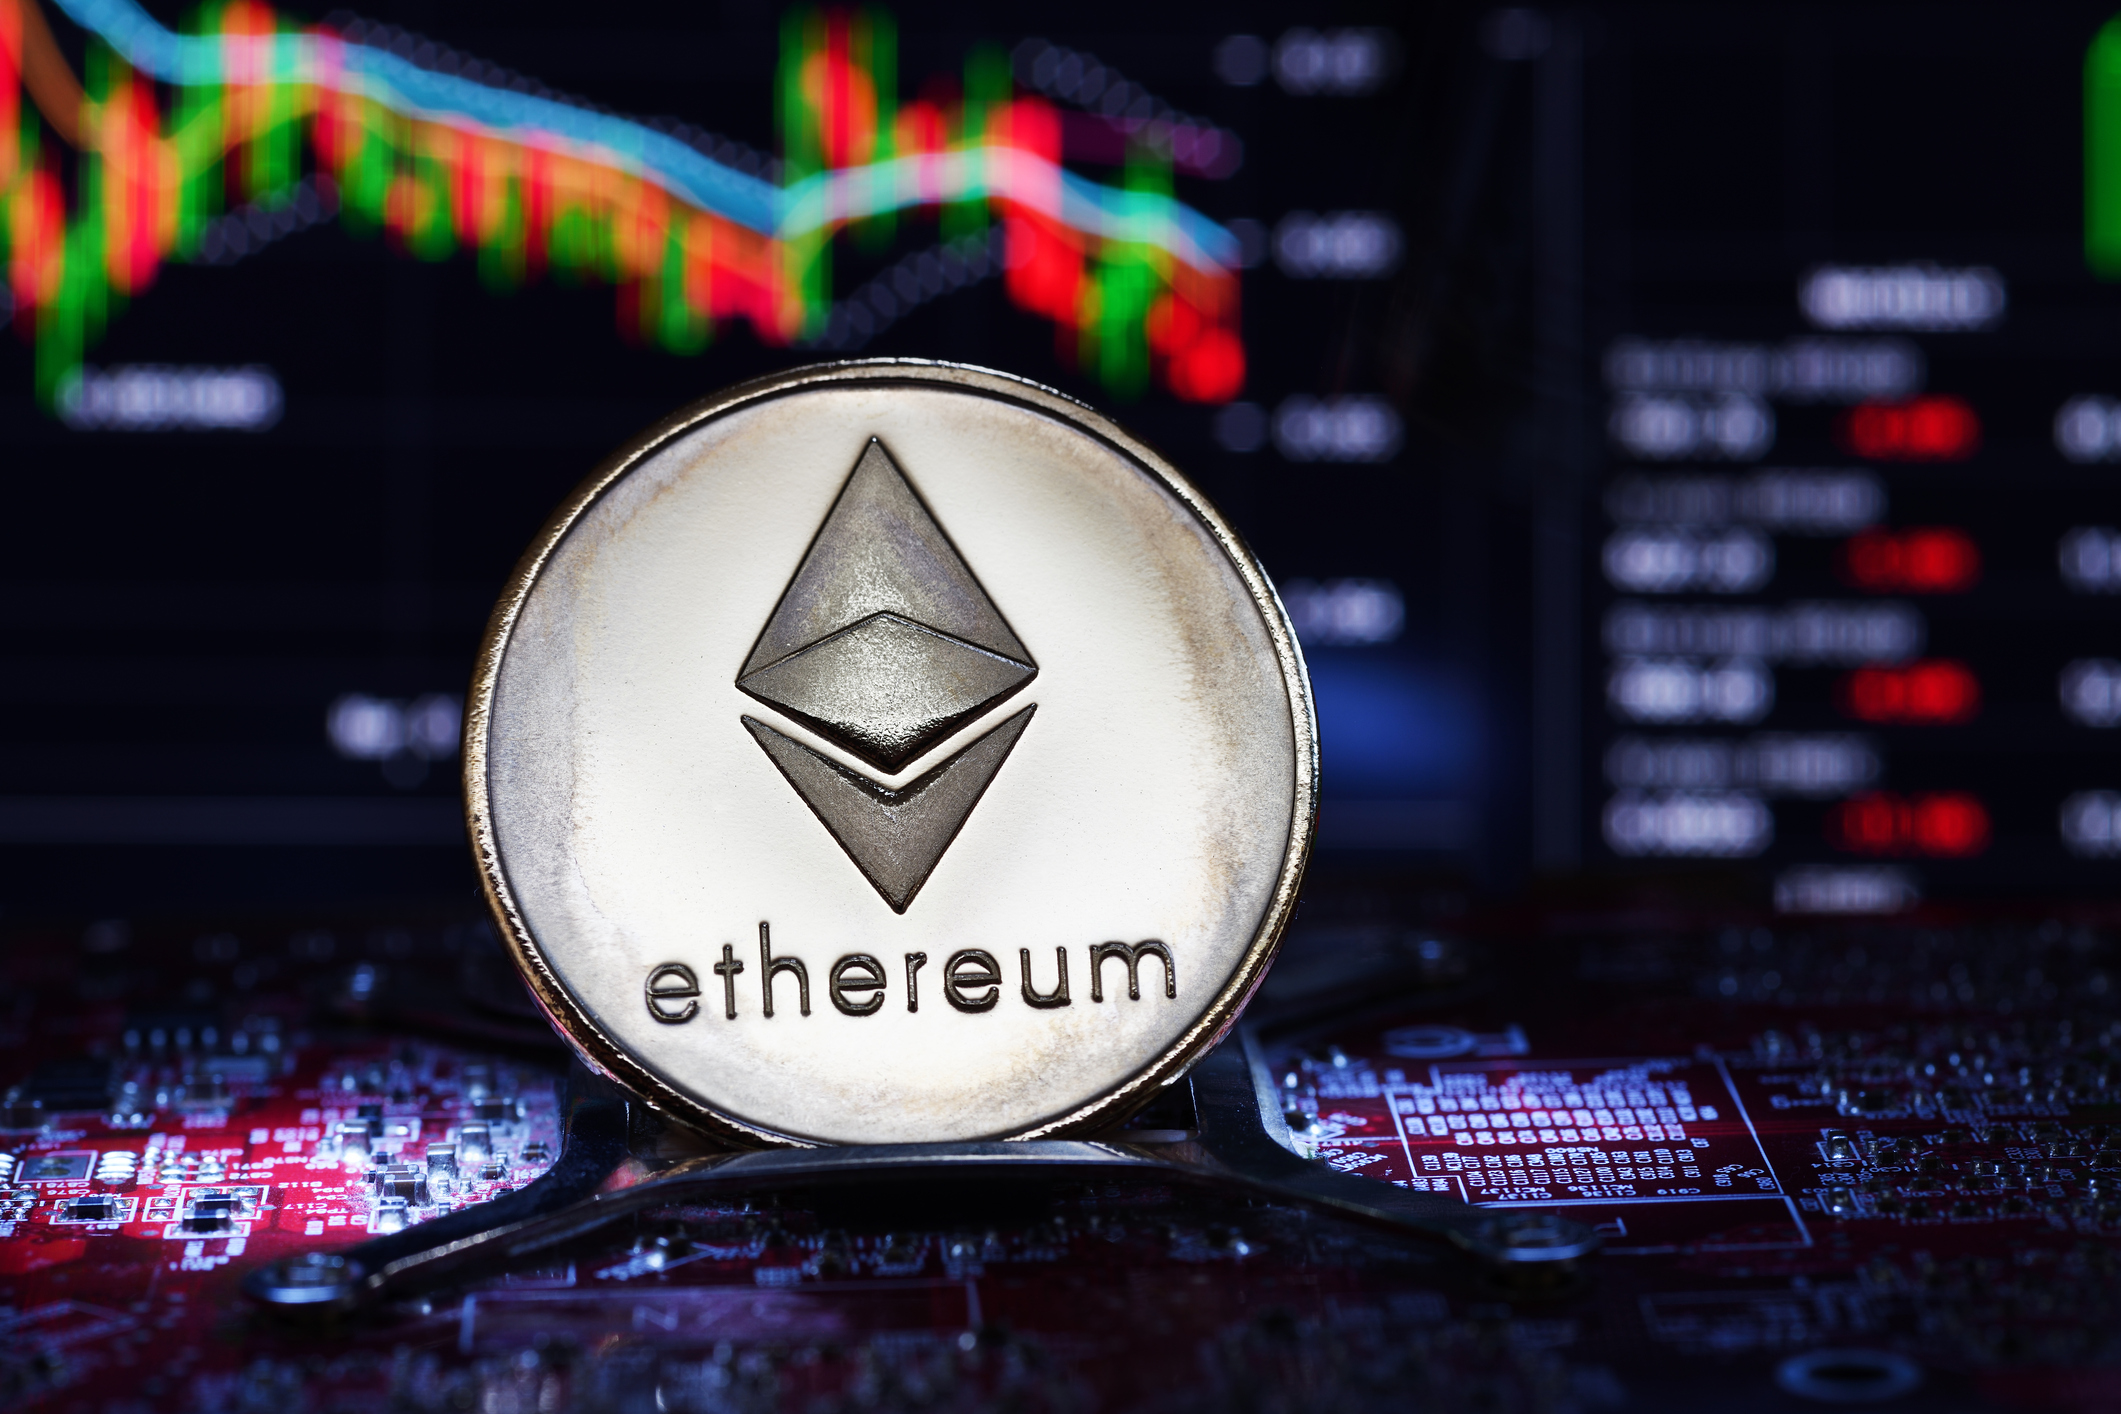 Ethereum Price Key Indicators Suggest A Strengthening Case For Surge To $3,800